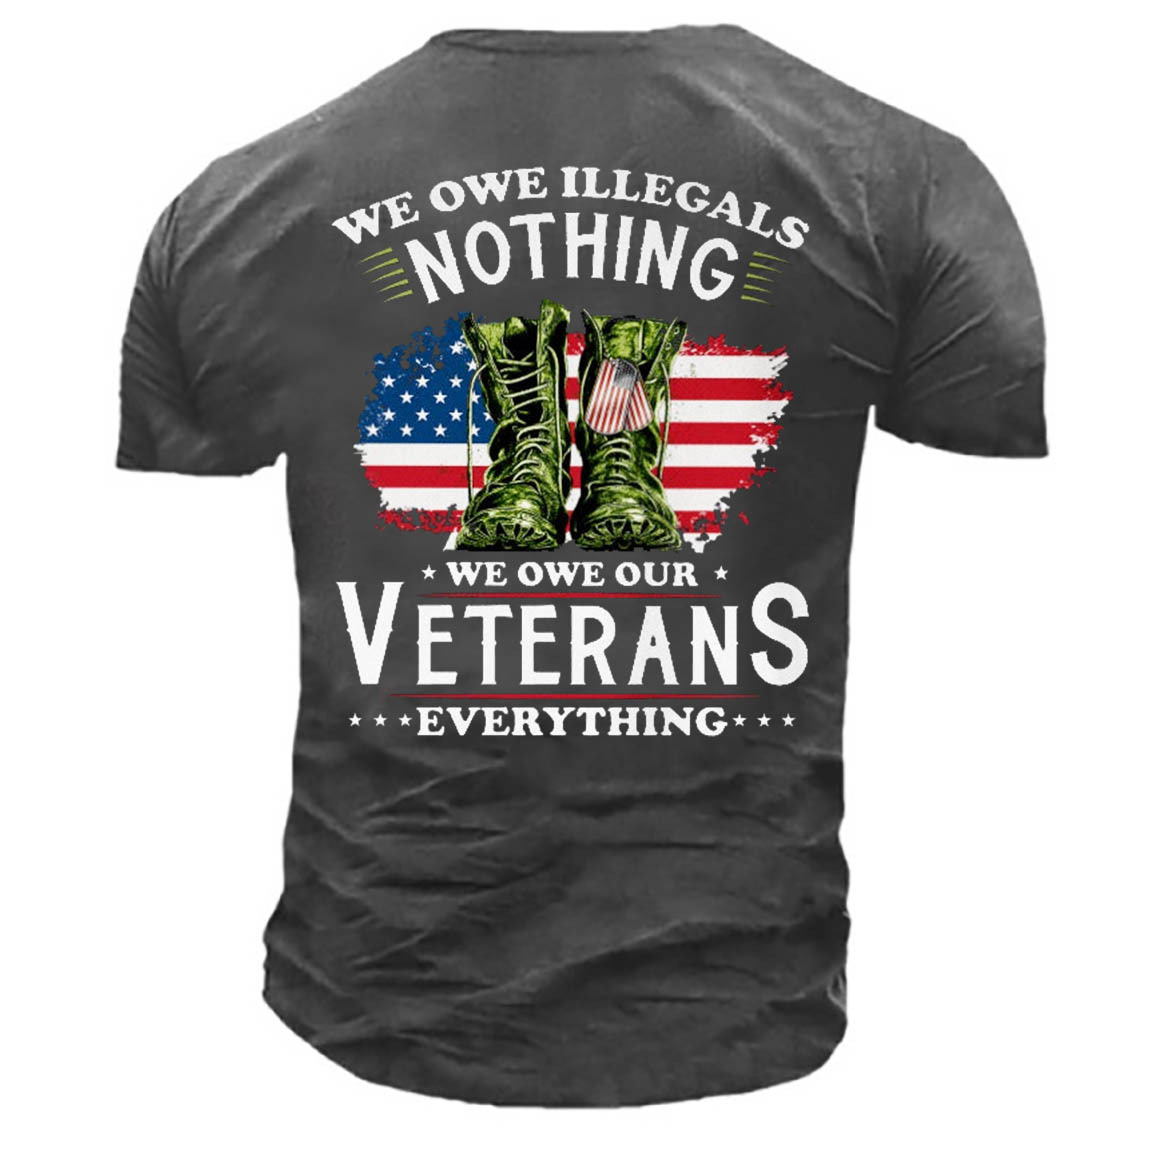 Men's Owe Our Veterans Chic Everything Cotton T-shirt